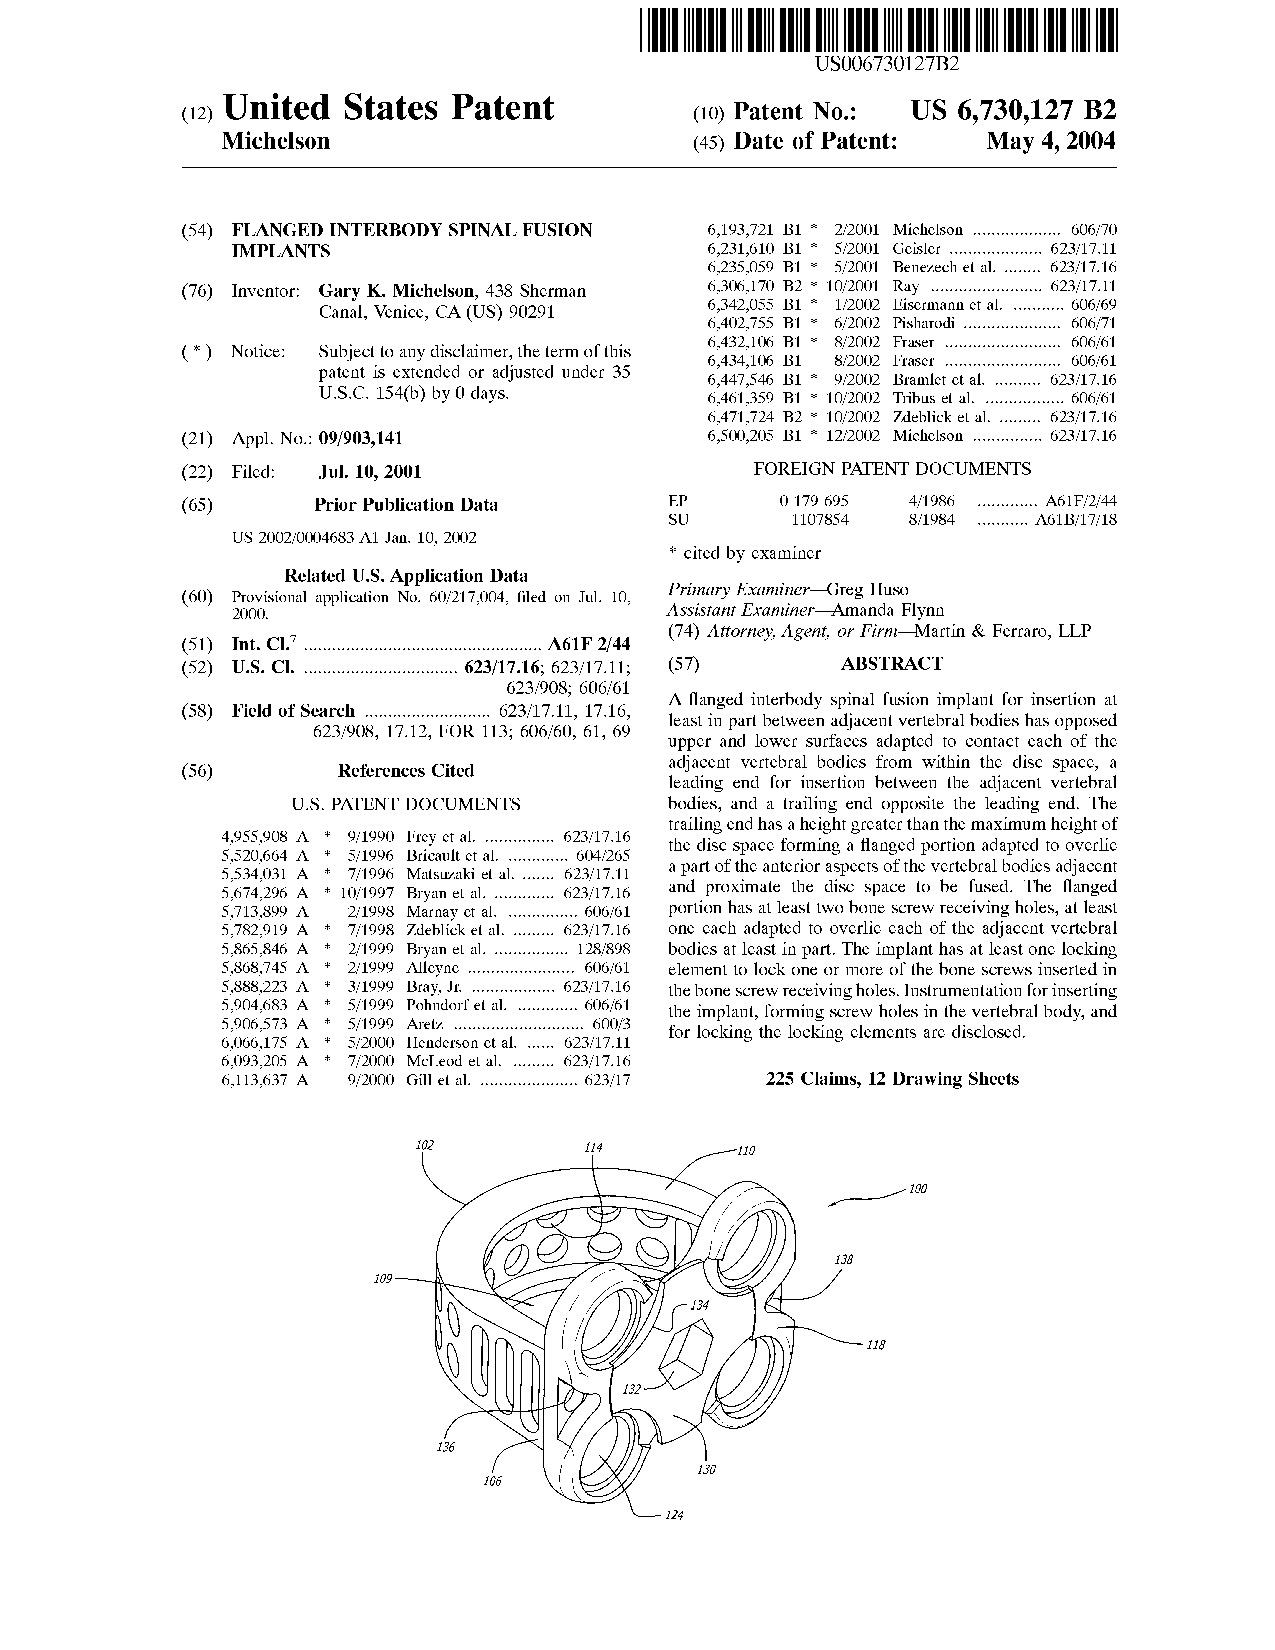 Flanged interbody spinal fusion implants - Patent 6,730,127